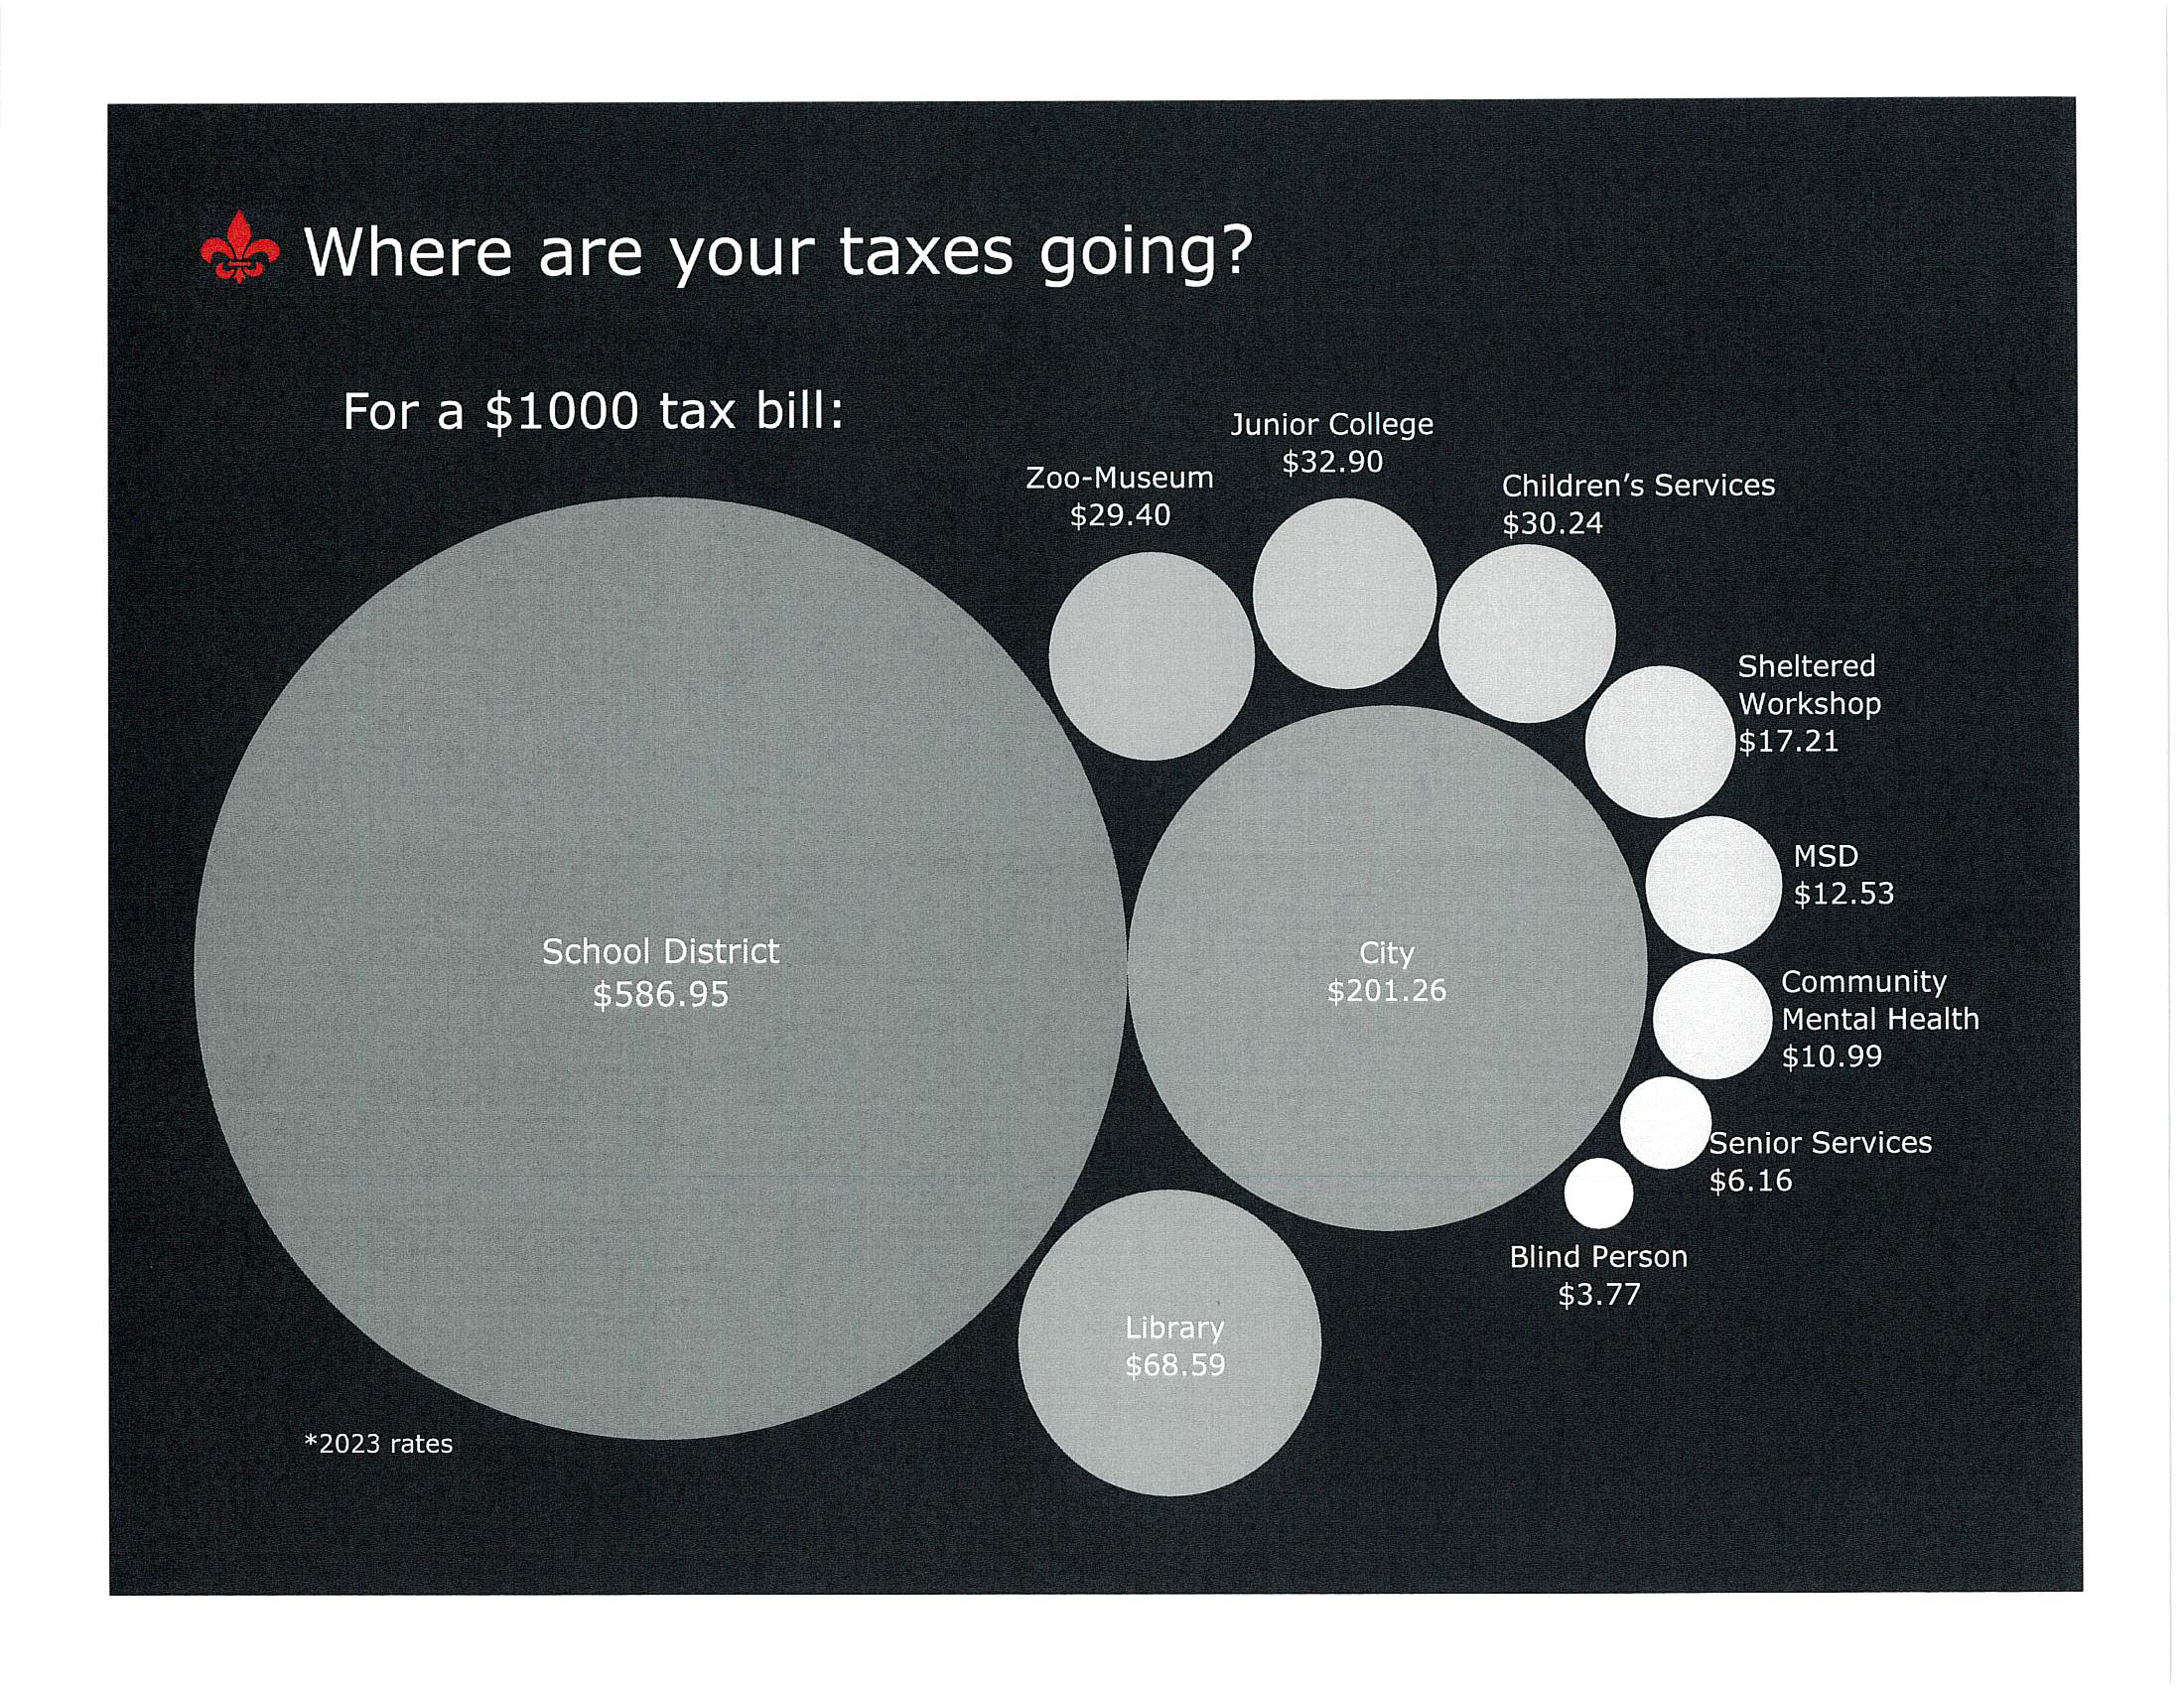 Where Taxes are Going 2023